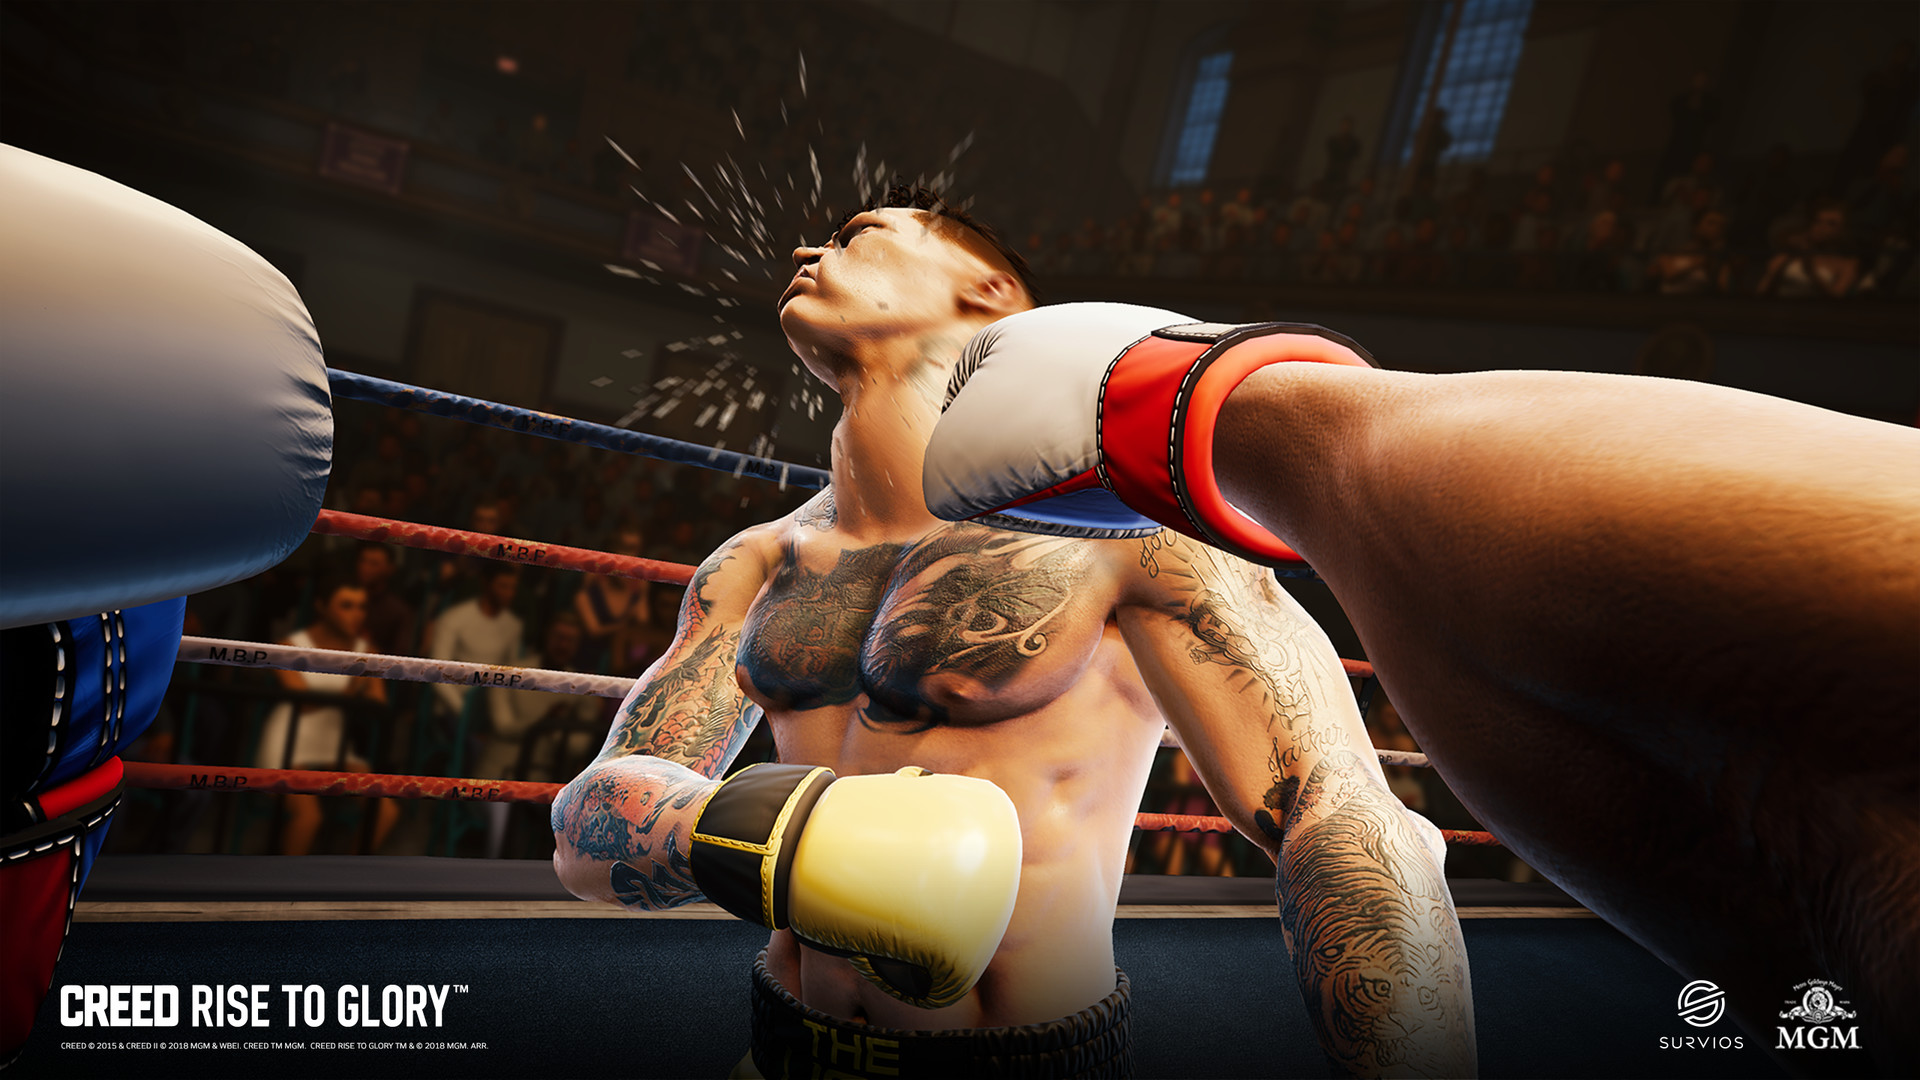 Creed игра ps4. Creed VR ps4. Creed Rise to Glory. Creed Rise to Glory VR. Бокс Крид VR.